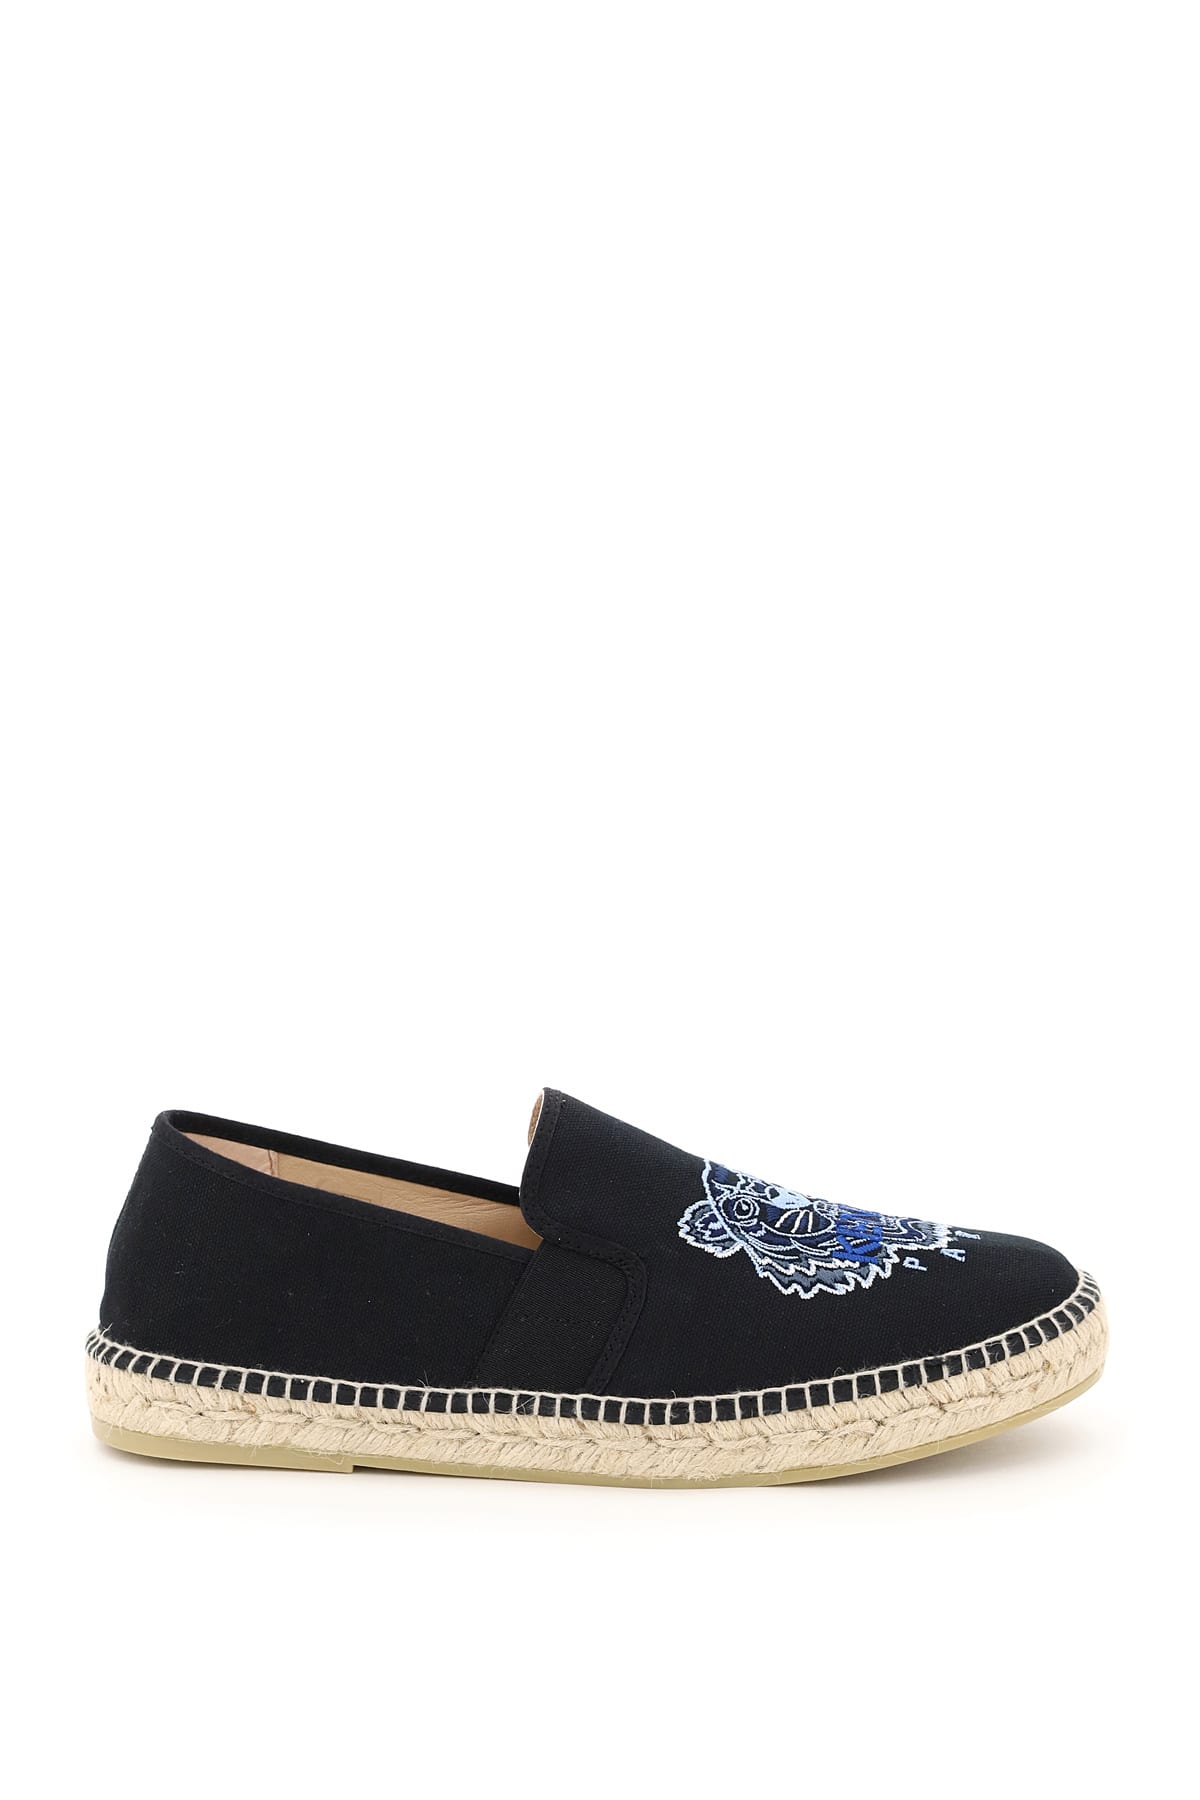 Buy Kenzo Elastic Tiger Espadrilles online, shop Kenzo shoes with free shipping